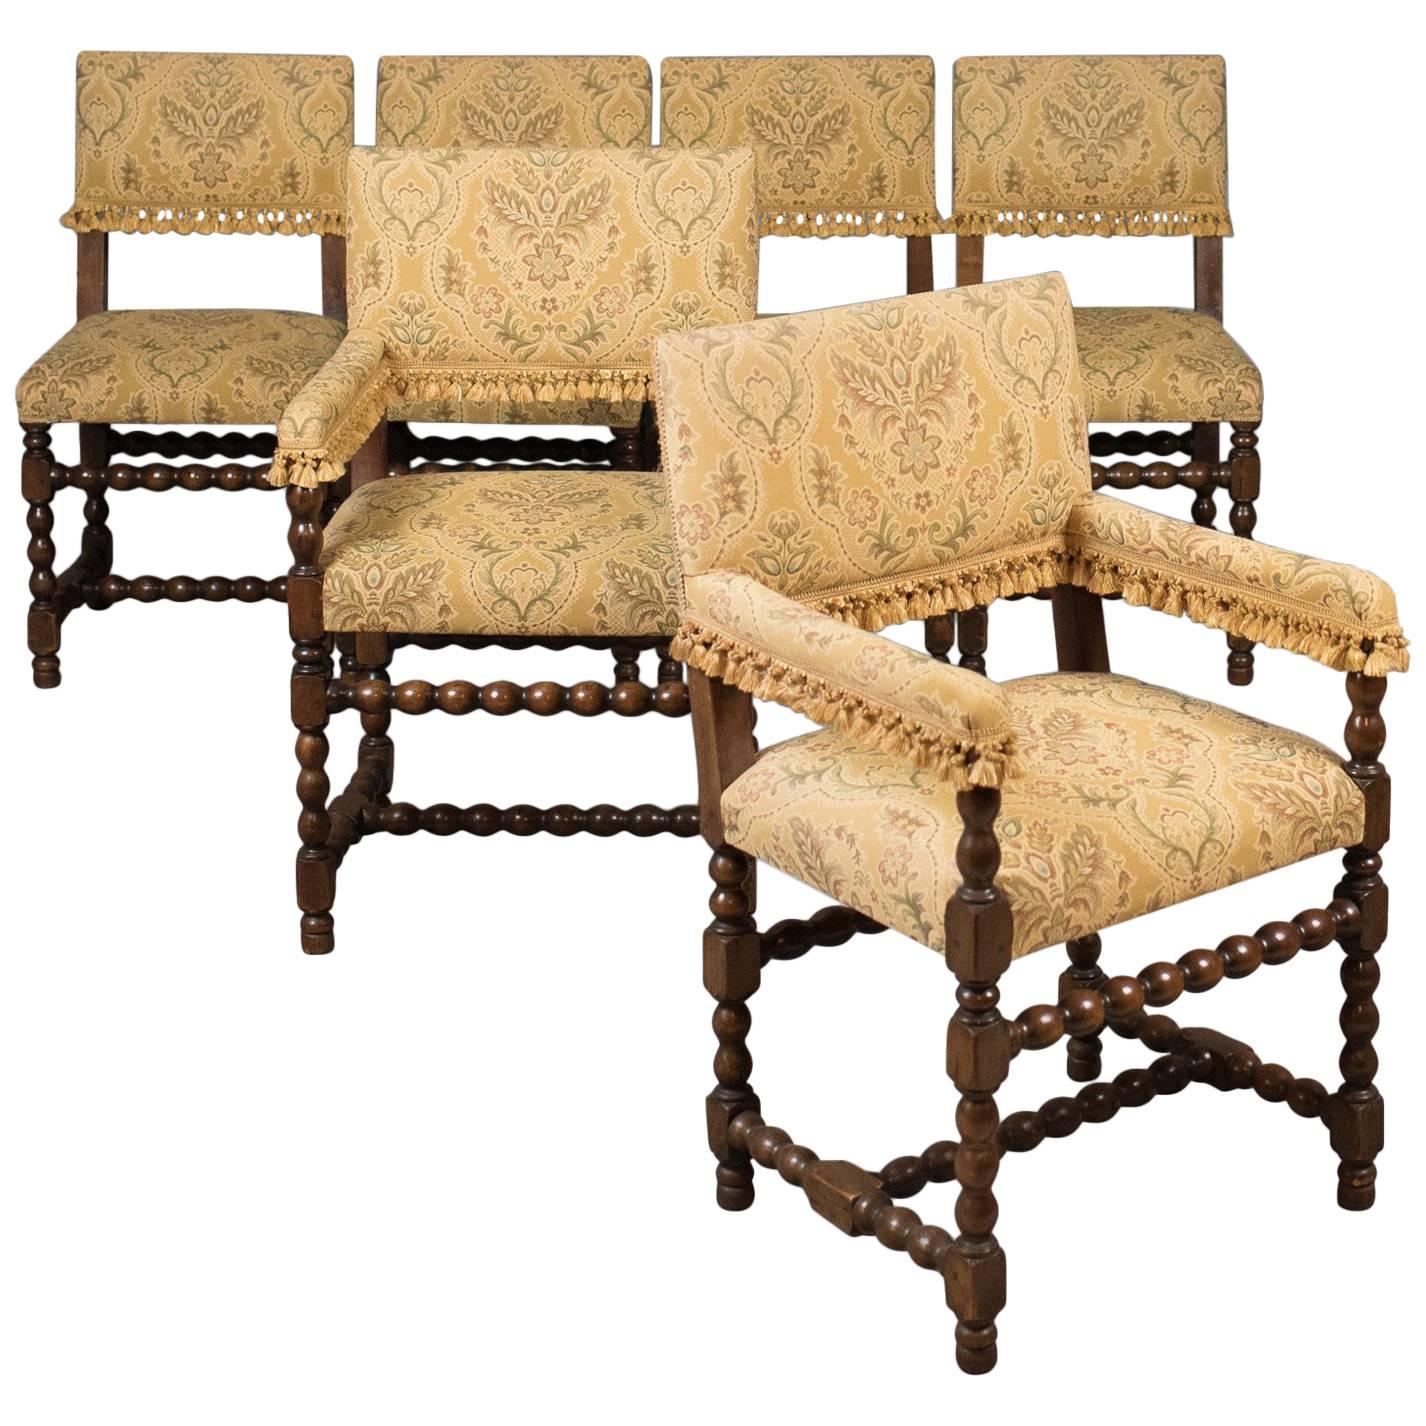 Set of Six Antique Dining Chairs, Edwardian Jacobean Revival